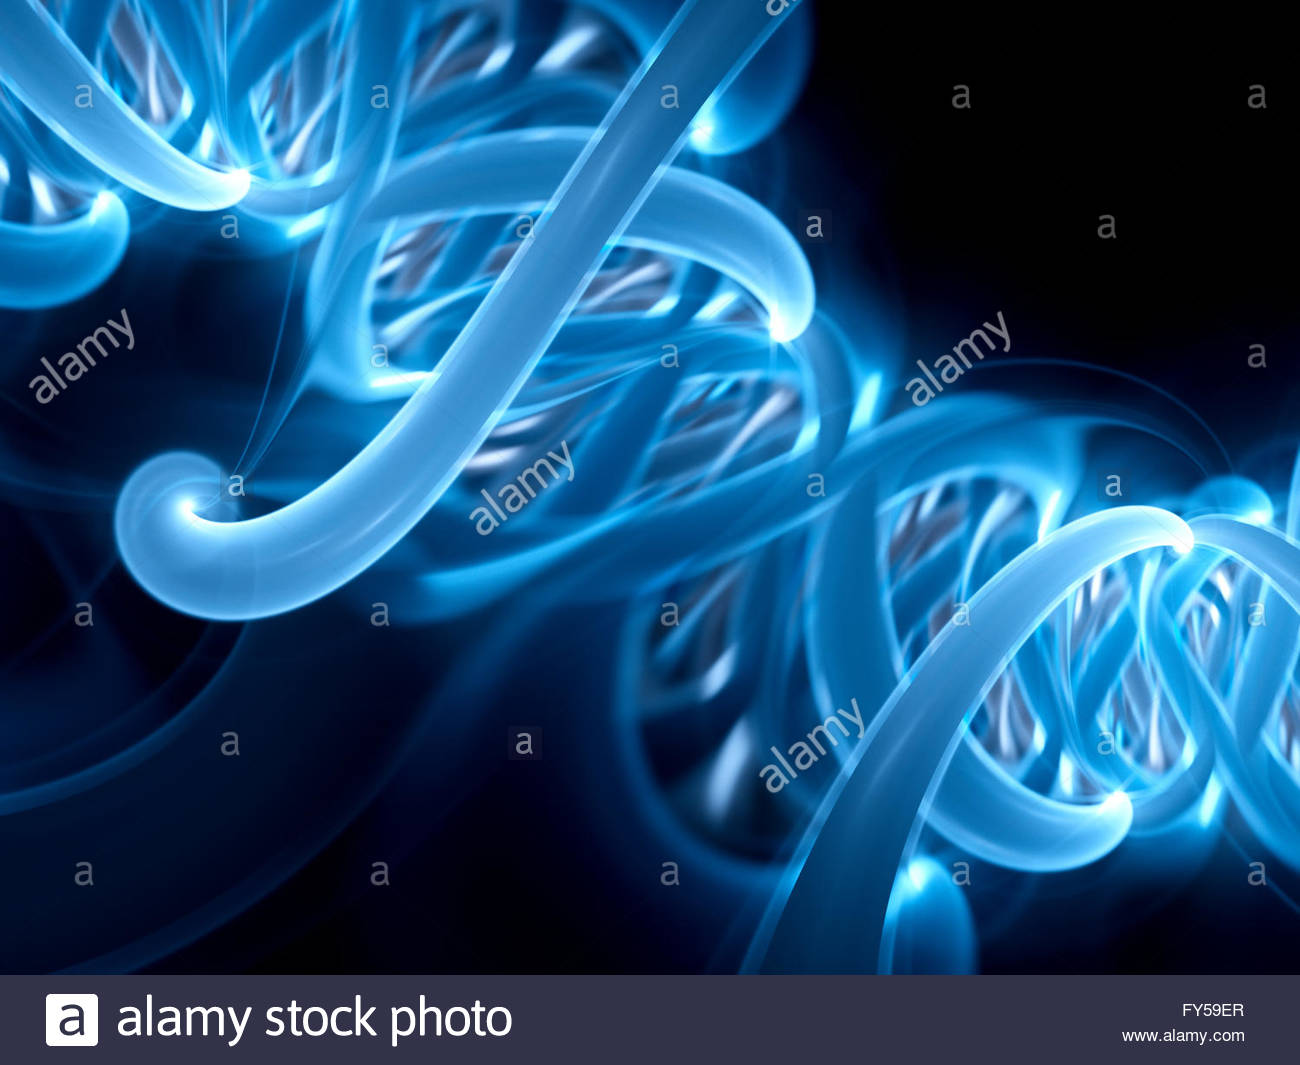 Blue glowing DNA spiral part computer generated abstract